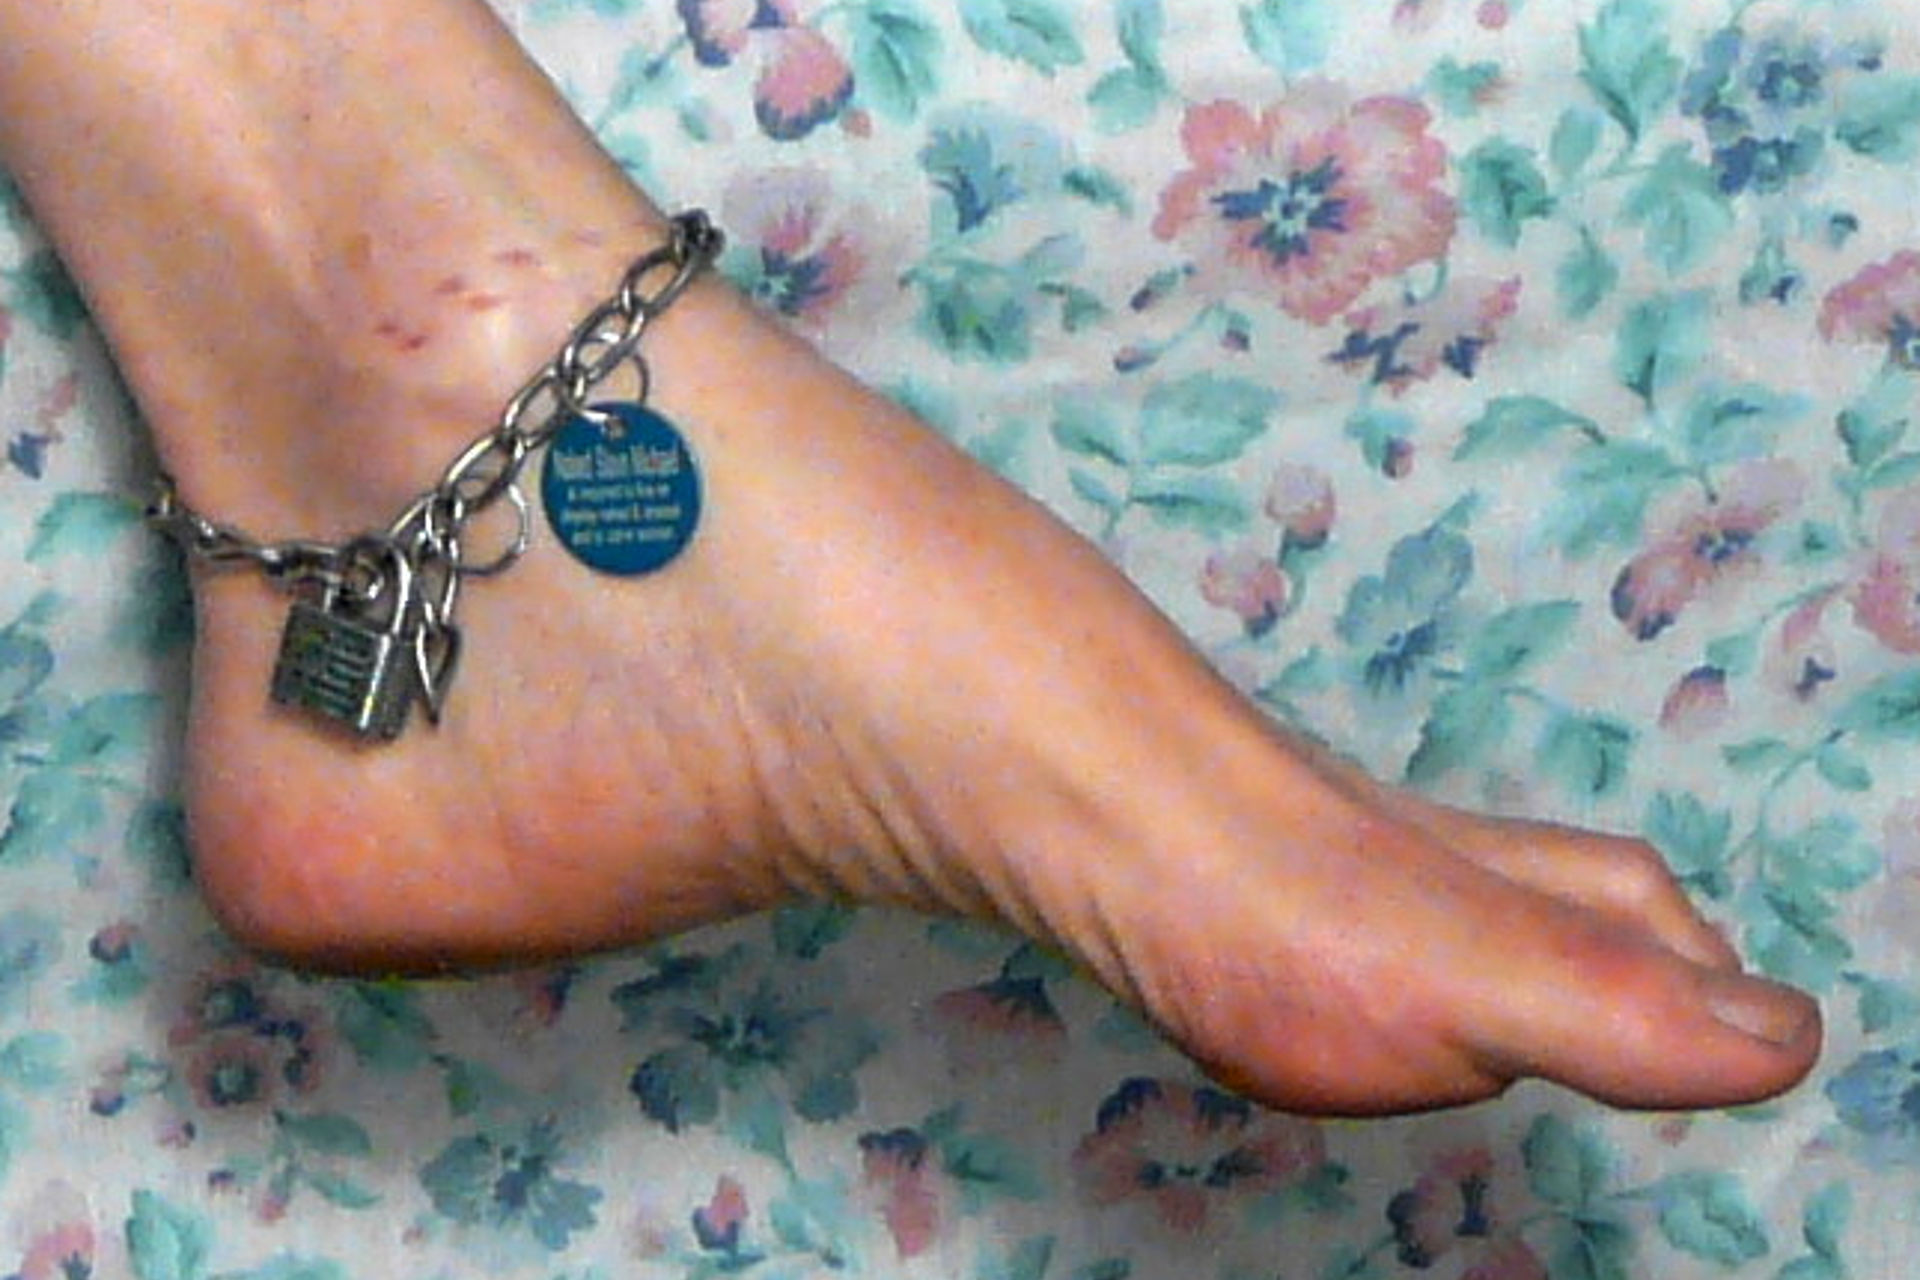 A gorgeous portrait of my beautiful left foot, with ankle chain and tag